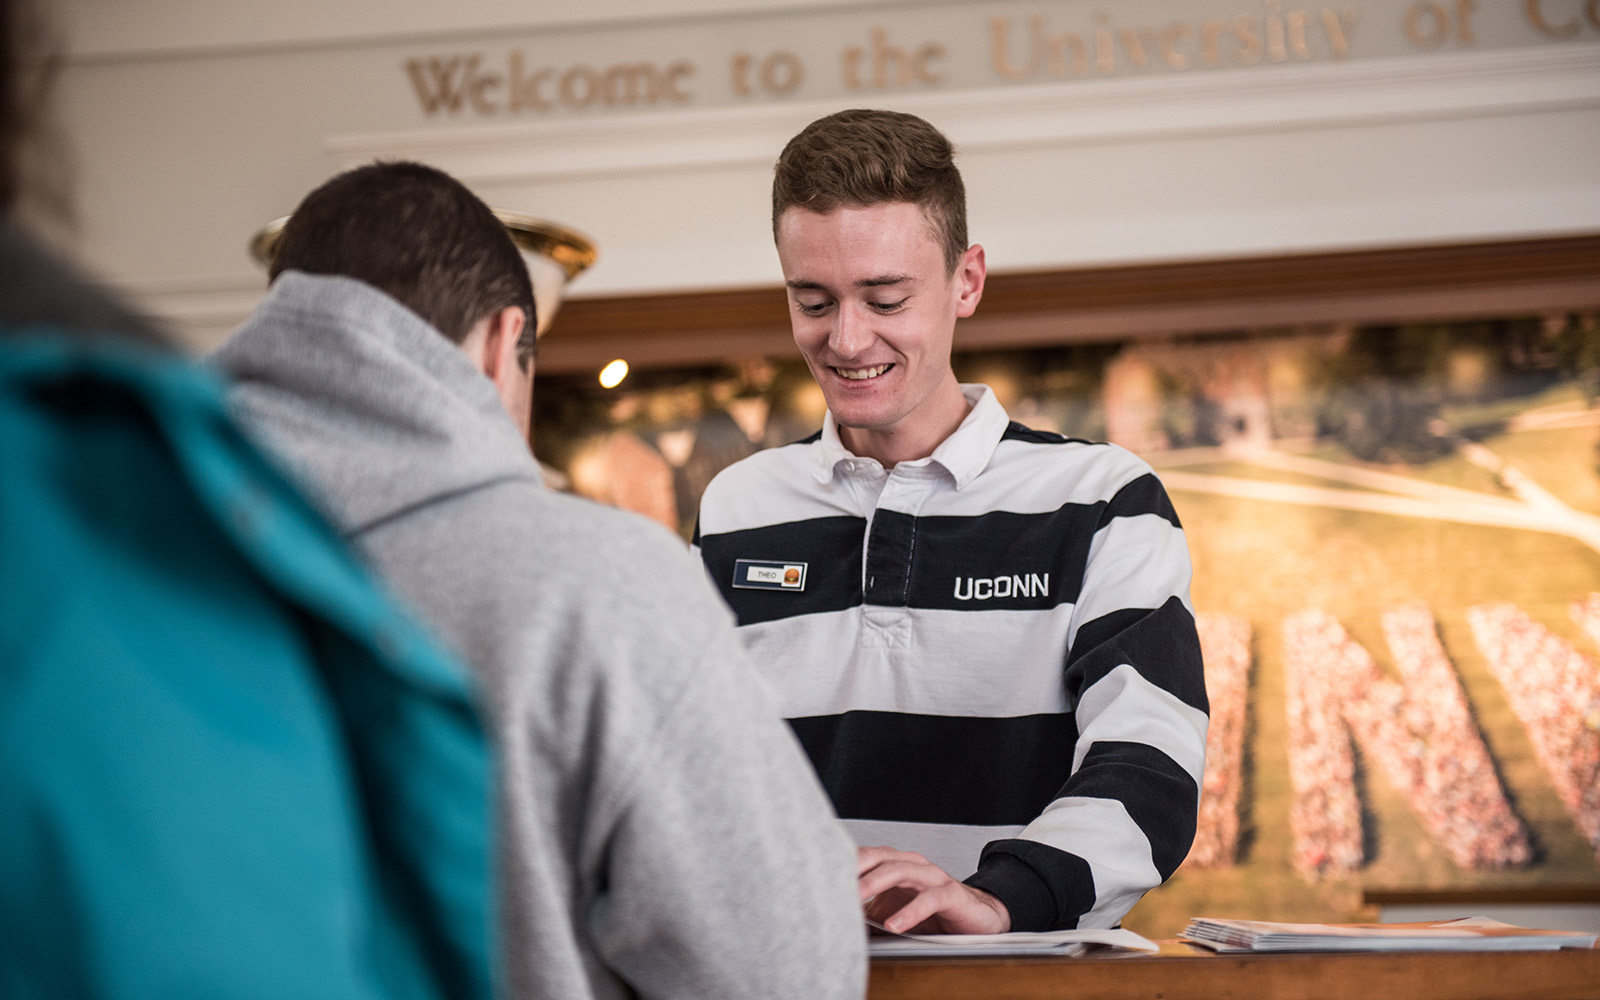 Theo Felopulos, engaging with prospective UConn students in his role as a Tour Guide for the University. (Nathan Oldham / UConn School of business)